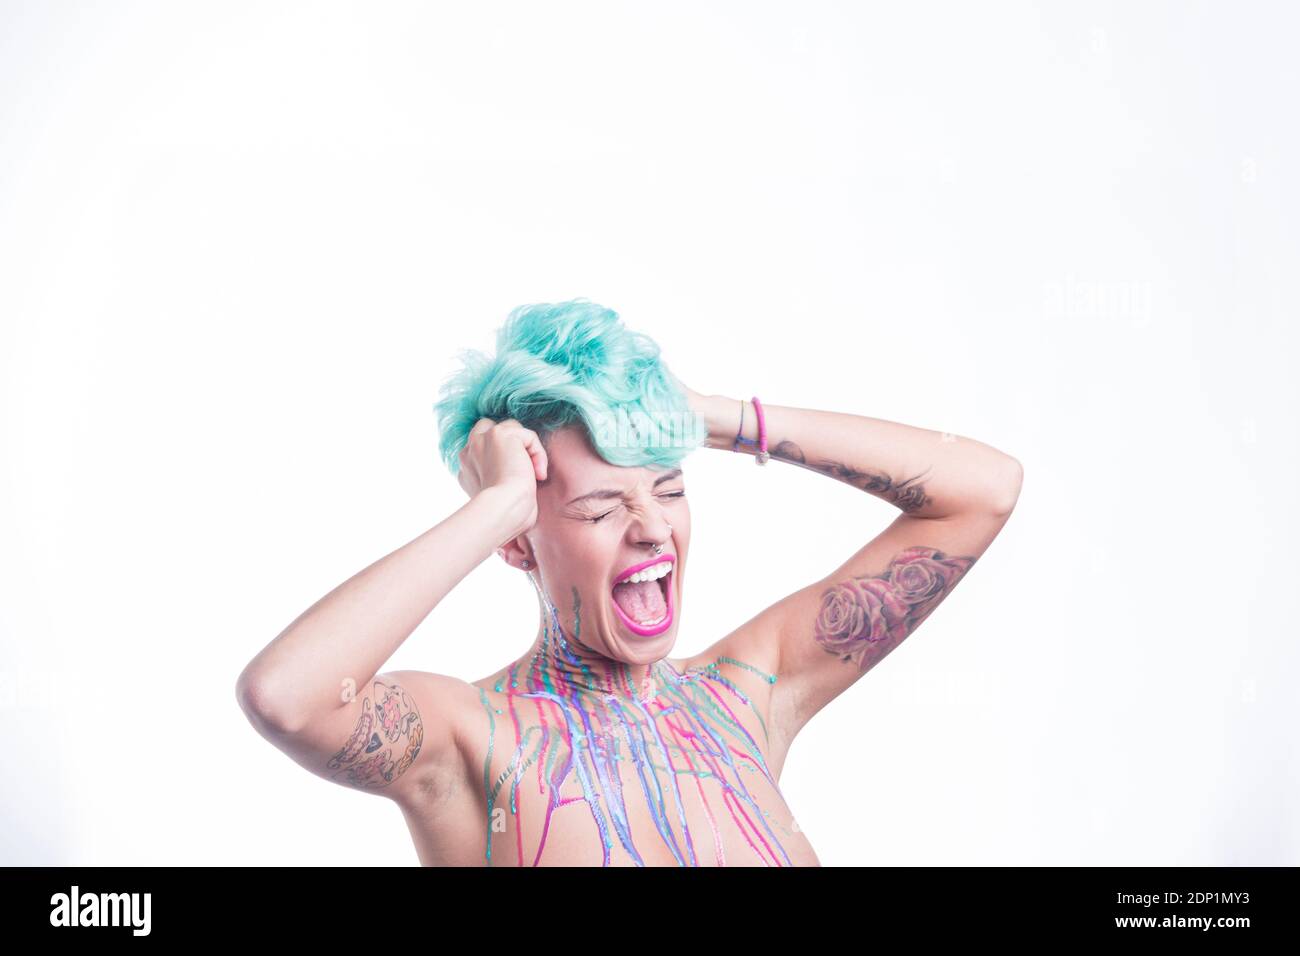 Beautiful woman with blue hair and body paint, screaing and tearing her hair out Stock Photo